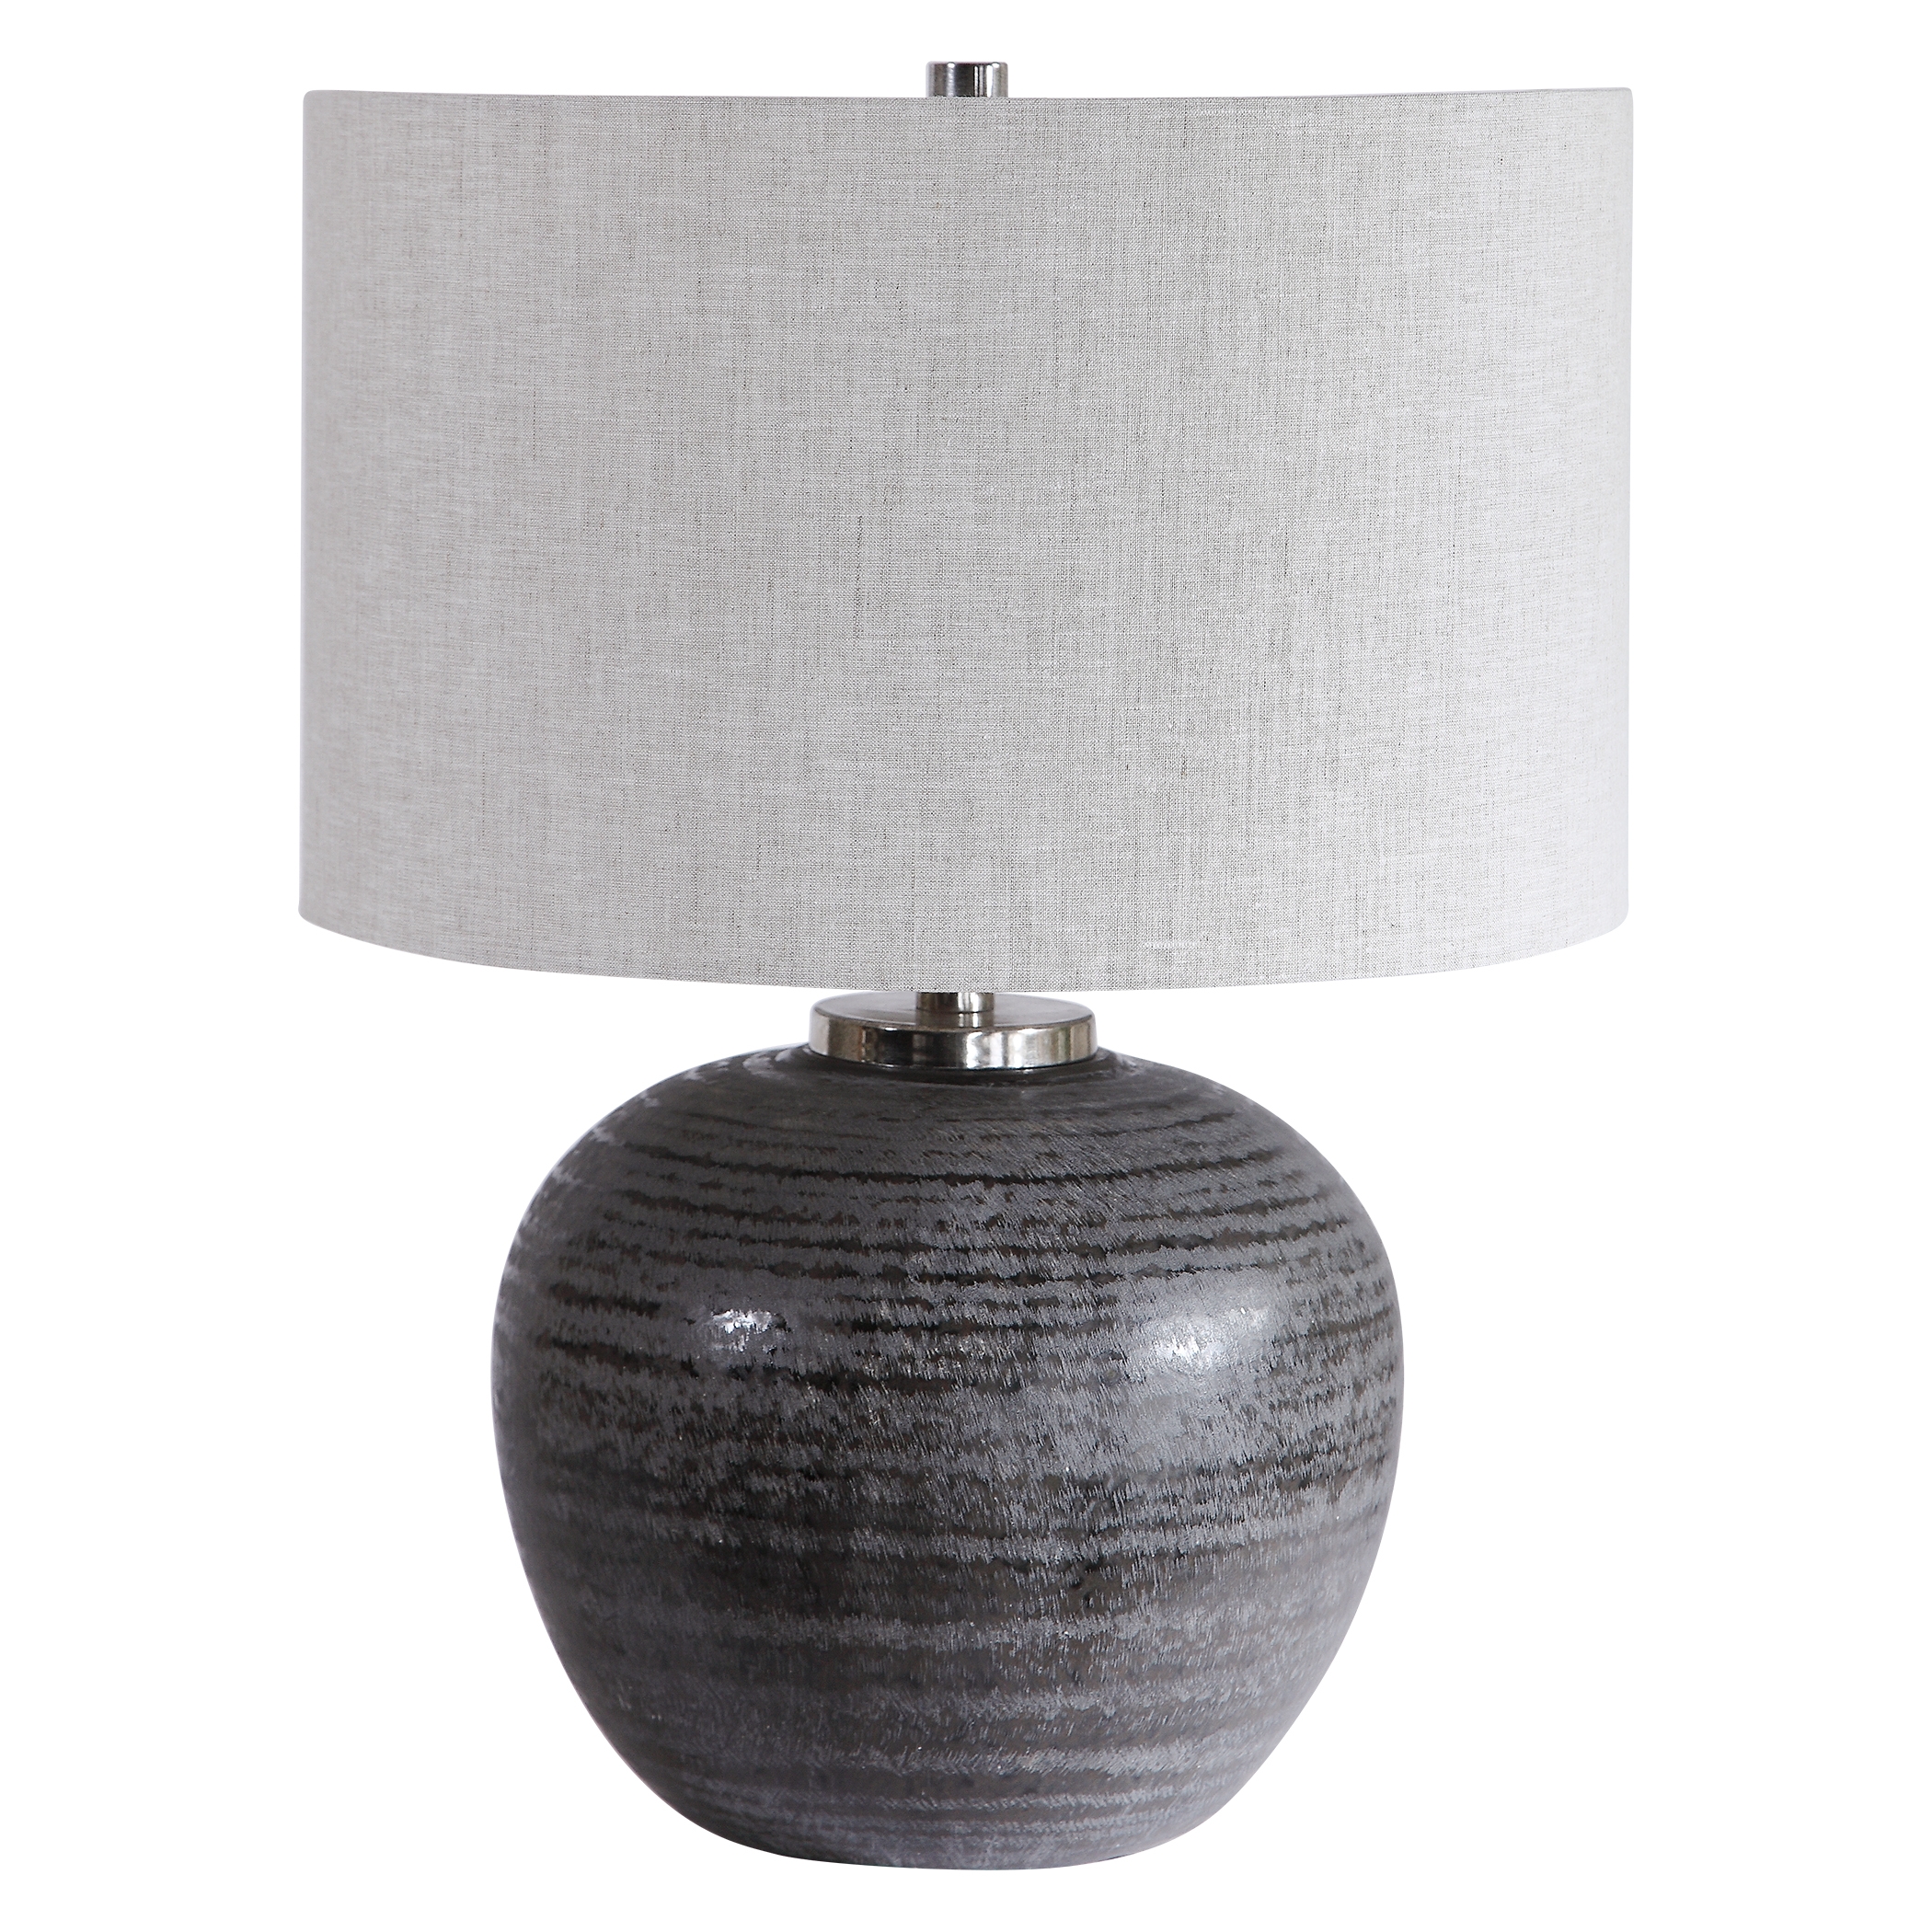 Mikkel Charcoal Table Lamp- AVAIL: AUG 13, 2021 - Image 5